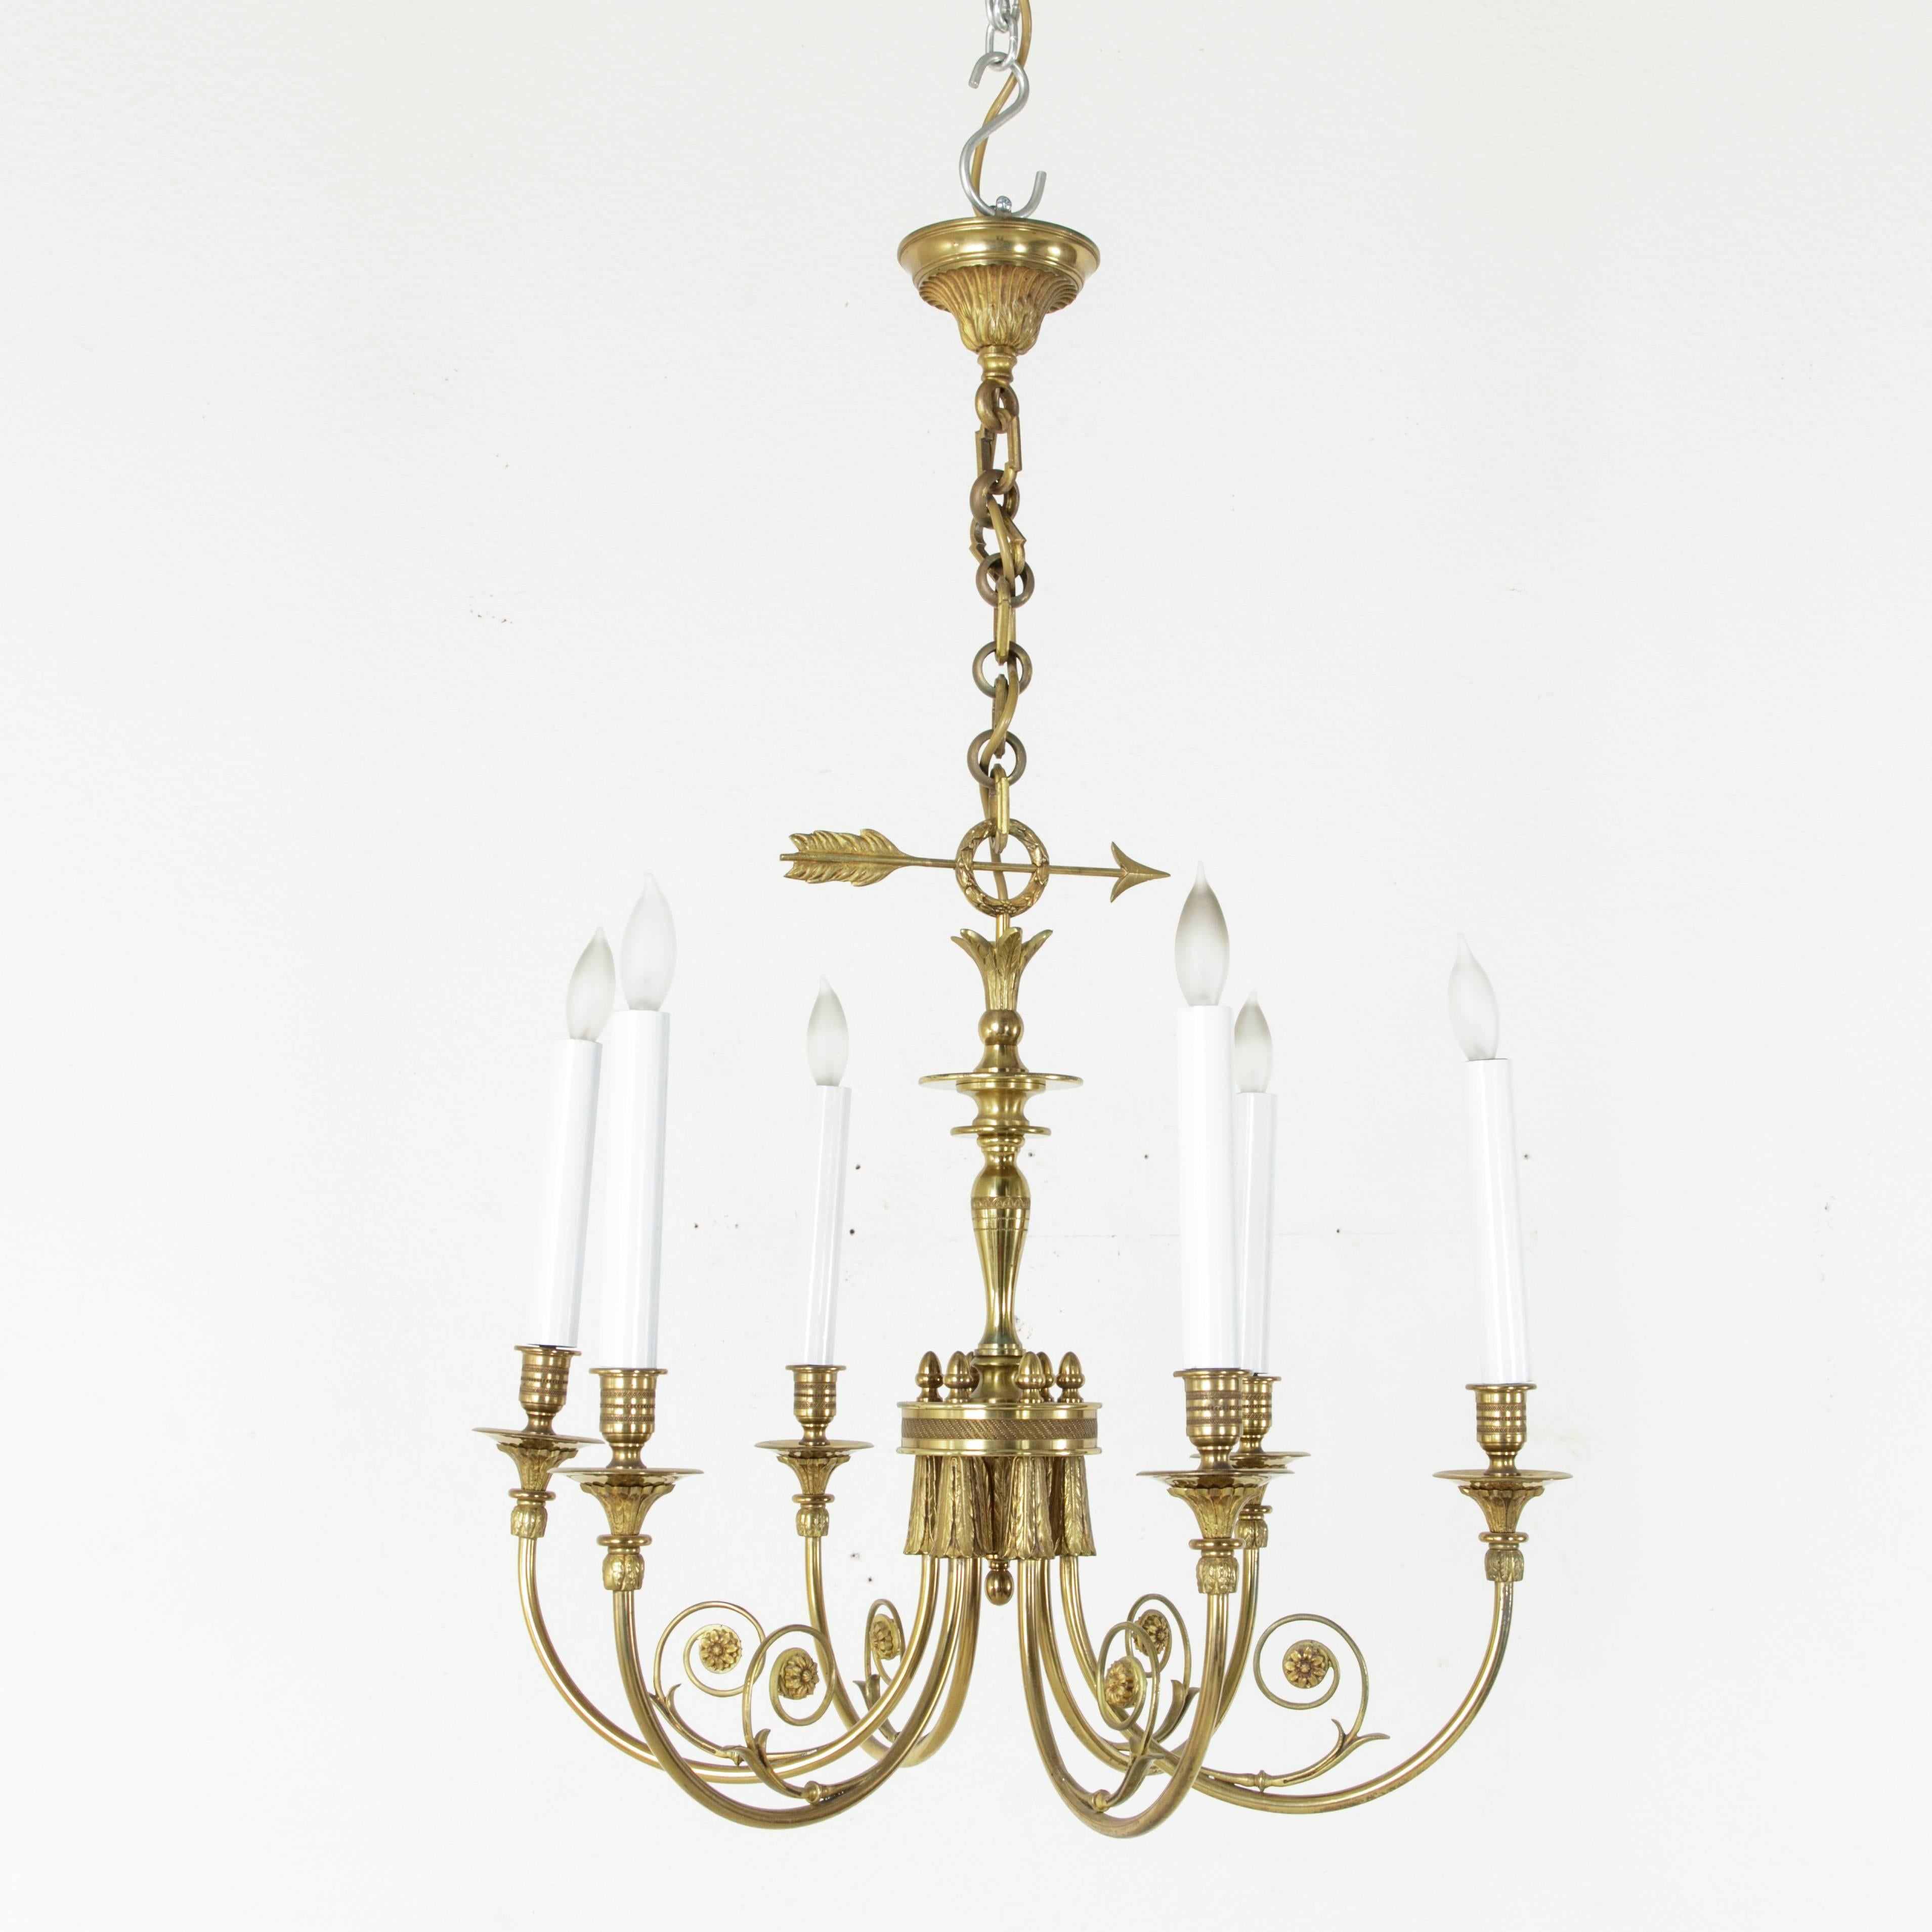 This elegant and classic bronze Directoire style French chandelier is of brightly polished solid bronze. The six arms each feature a curling frond ending in a single rosette while the central column is detailed with feather and arrow finials. Each